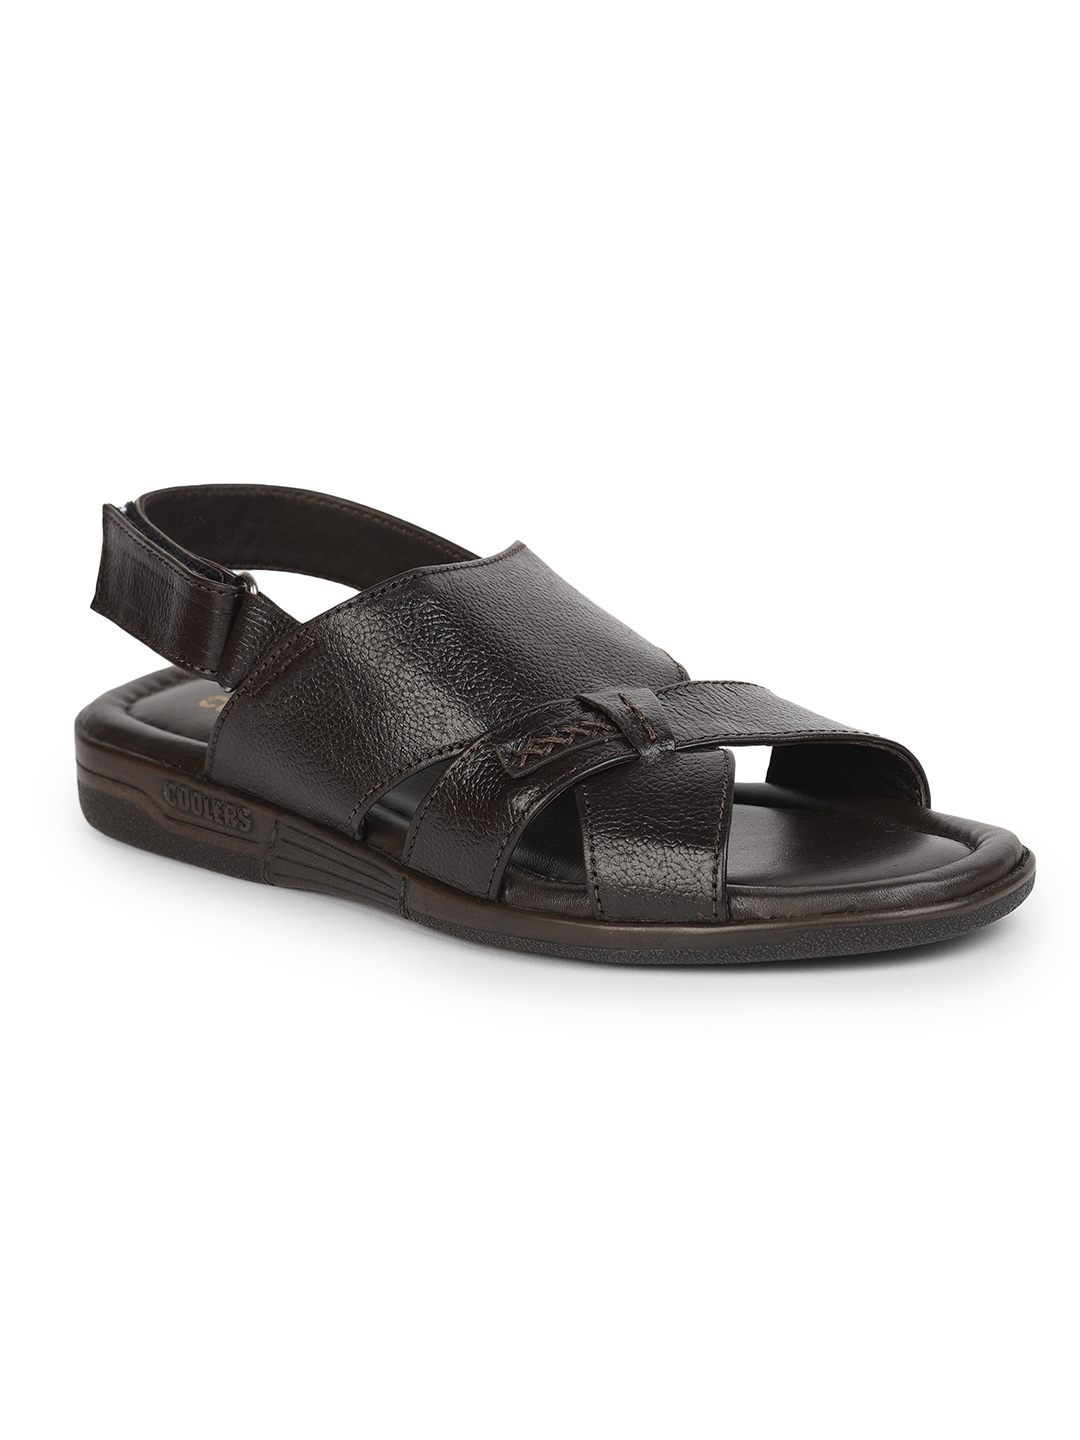 Liberty | Coolers by Liberty Brown Sandals 7194-103 For :- Men